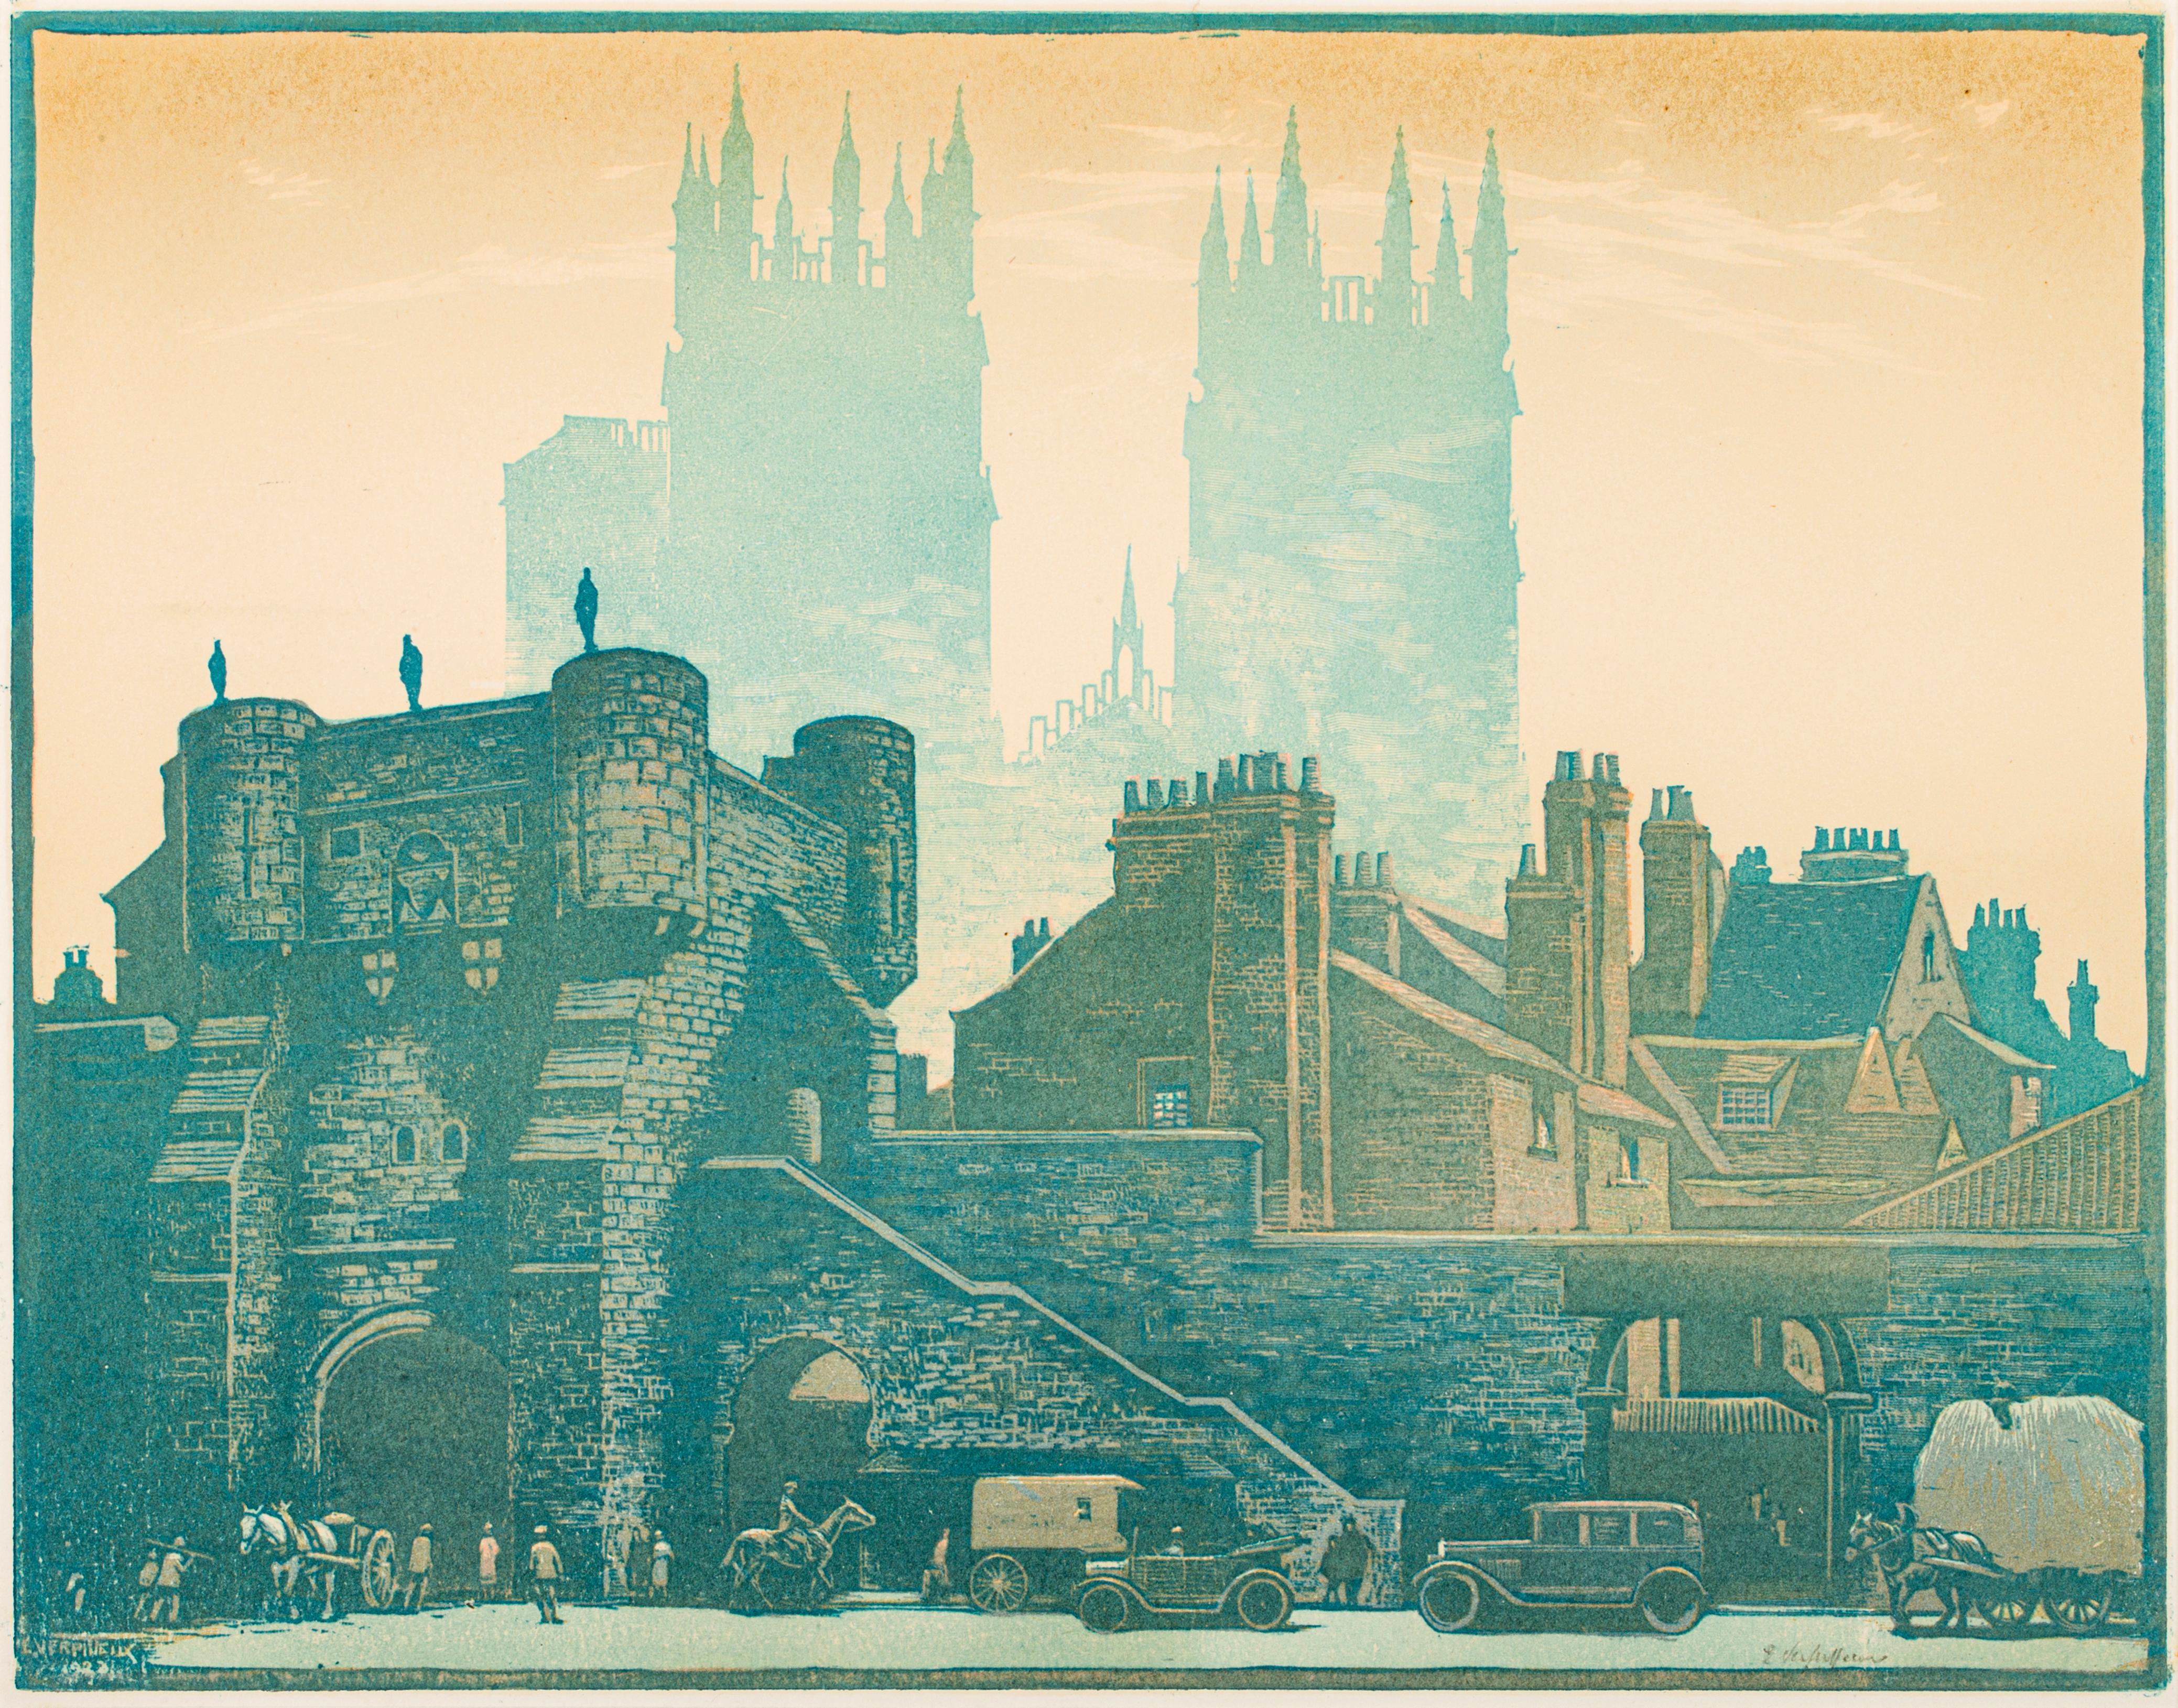 Emile Antoine Verpilleux, 1888-1964
York, 1920
Original woodcut, printed in colors
14 x 18 inches
Signed in pencil